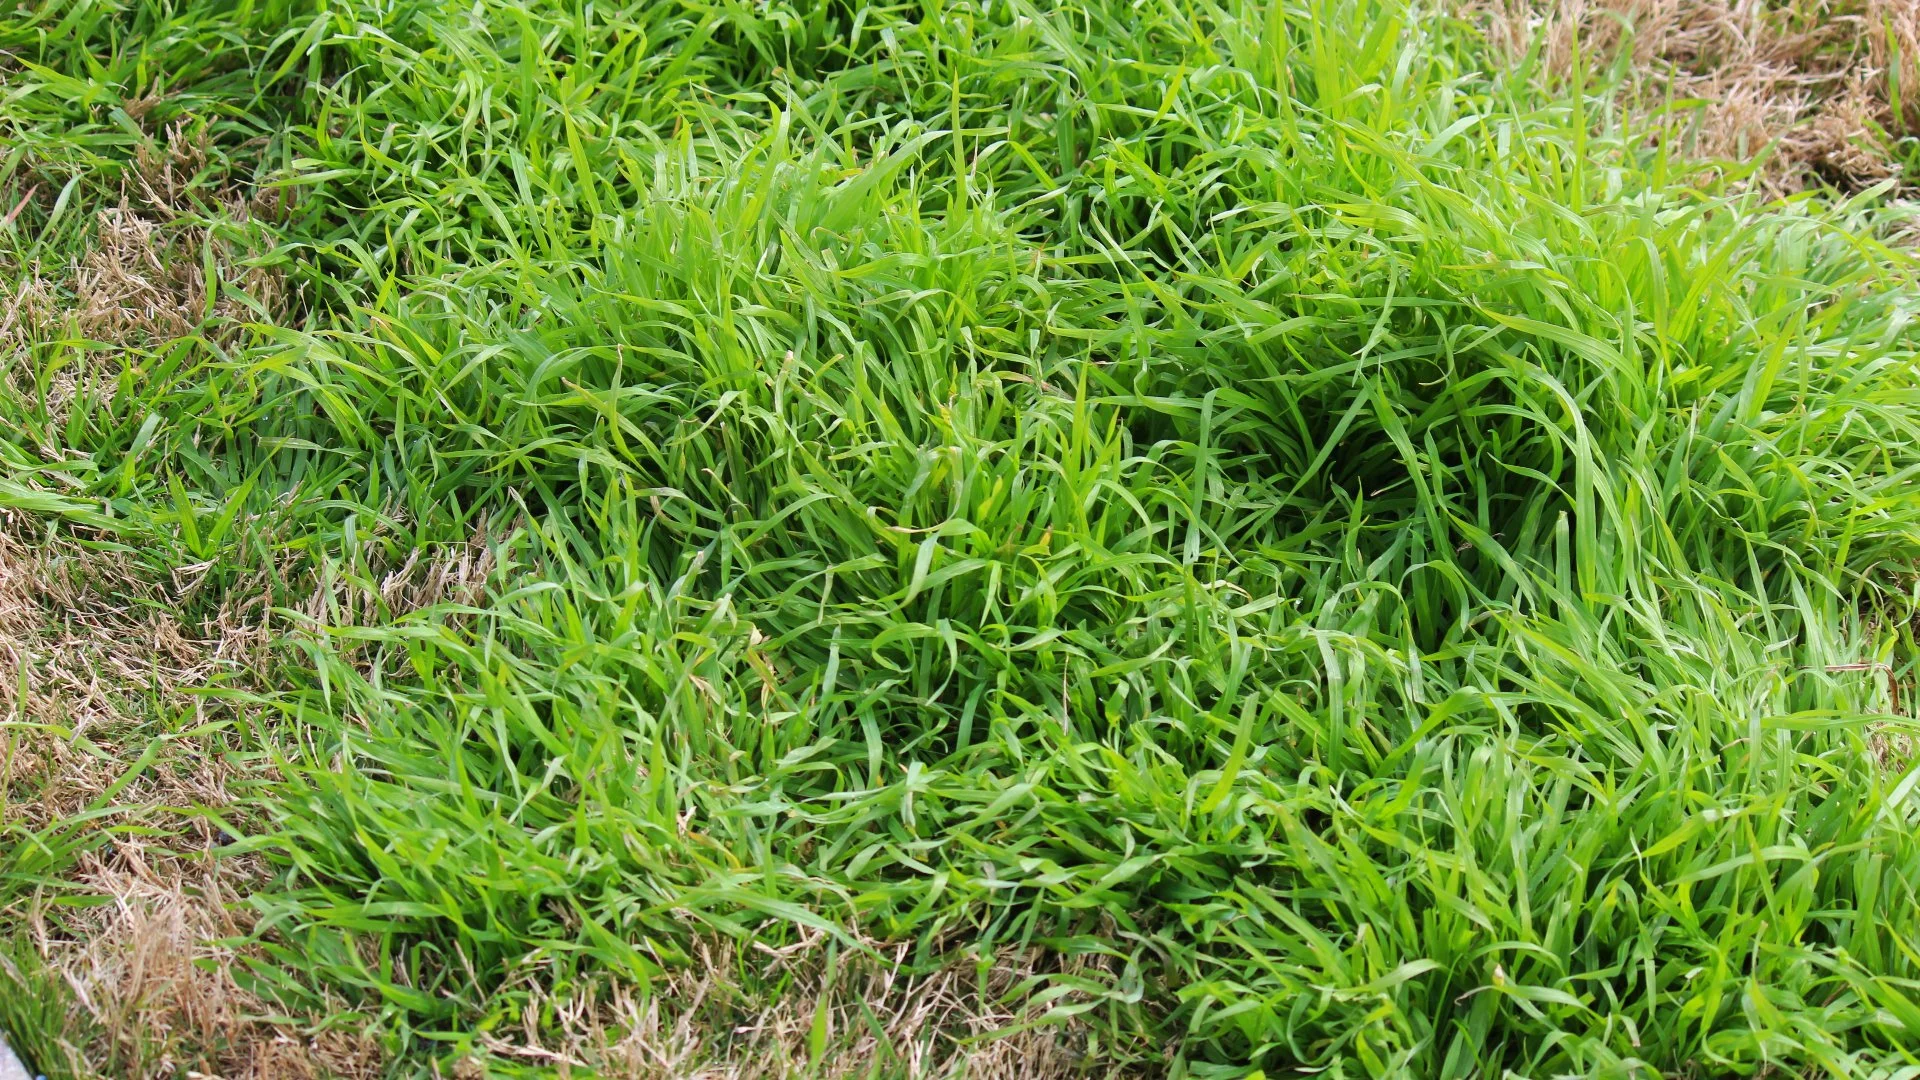 How Do I Permanently Keep Weeds off of My Lawn?